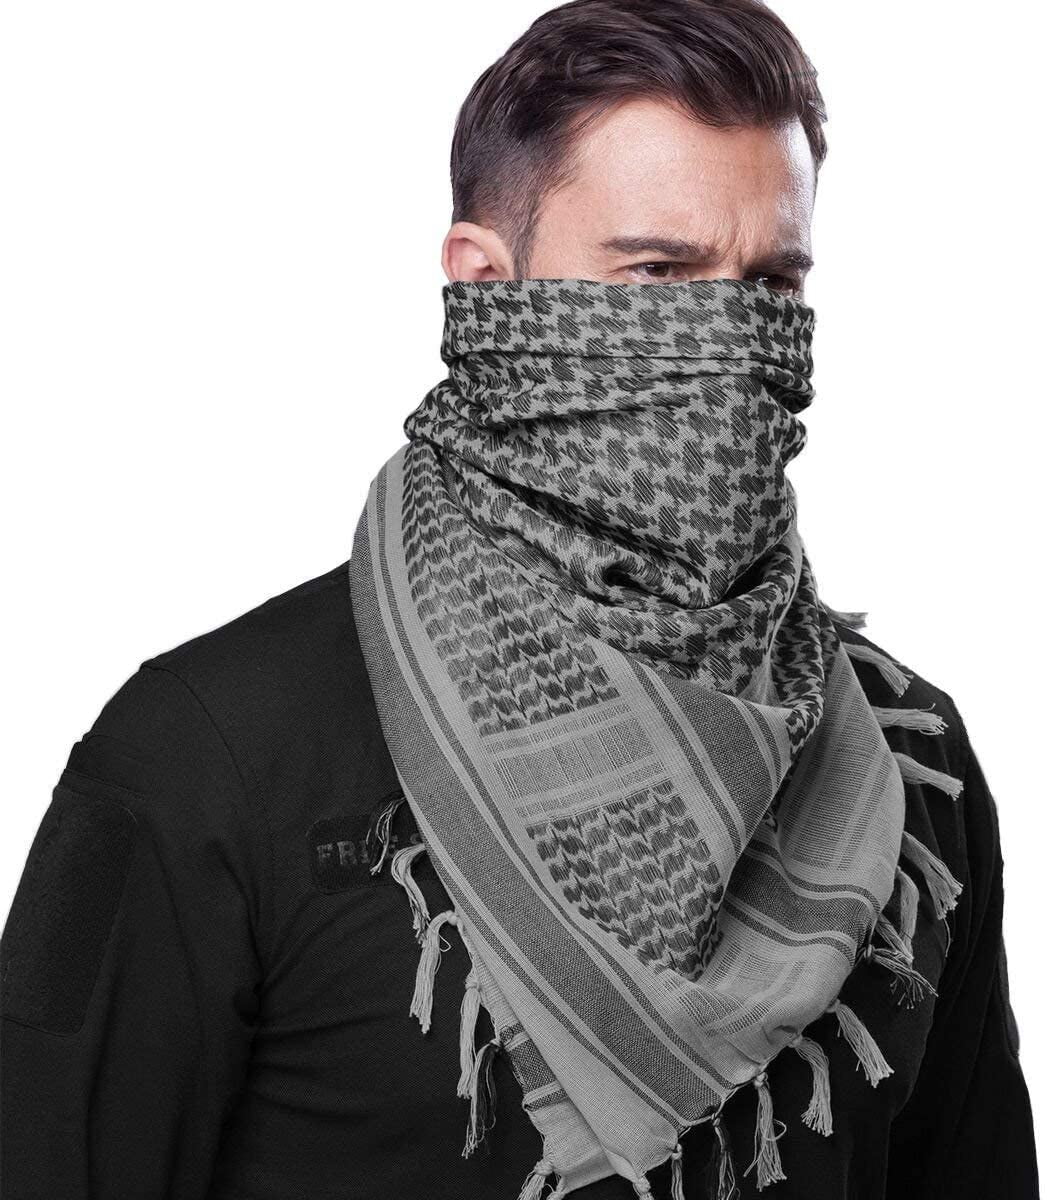 FREE SOLDIER 100% Cotton Scarf Military Shemagh Tactical Desert Keffiyeh Head Neck Scarf Arab Wrap with Tassel 43x43 inches 